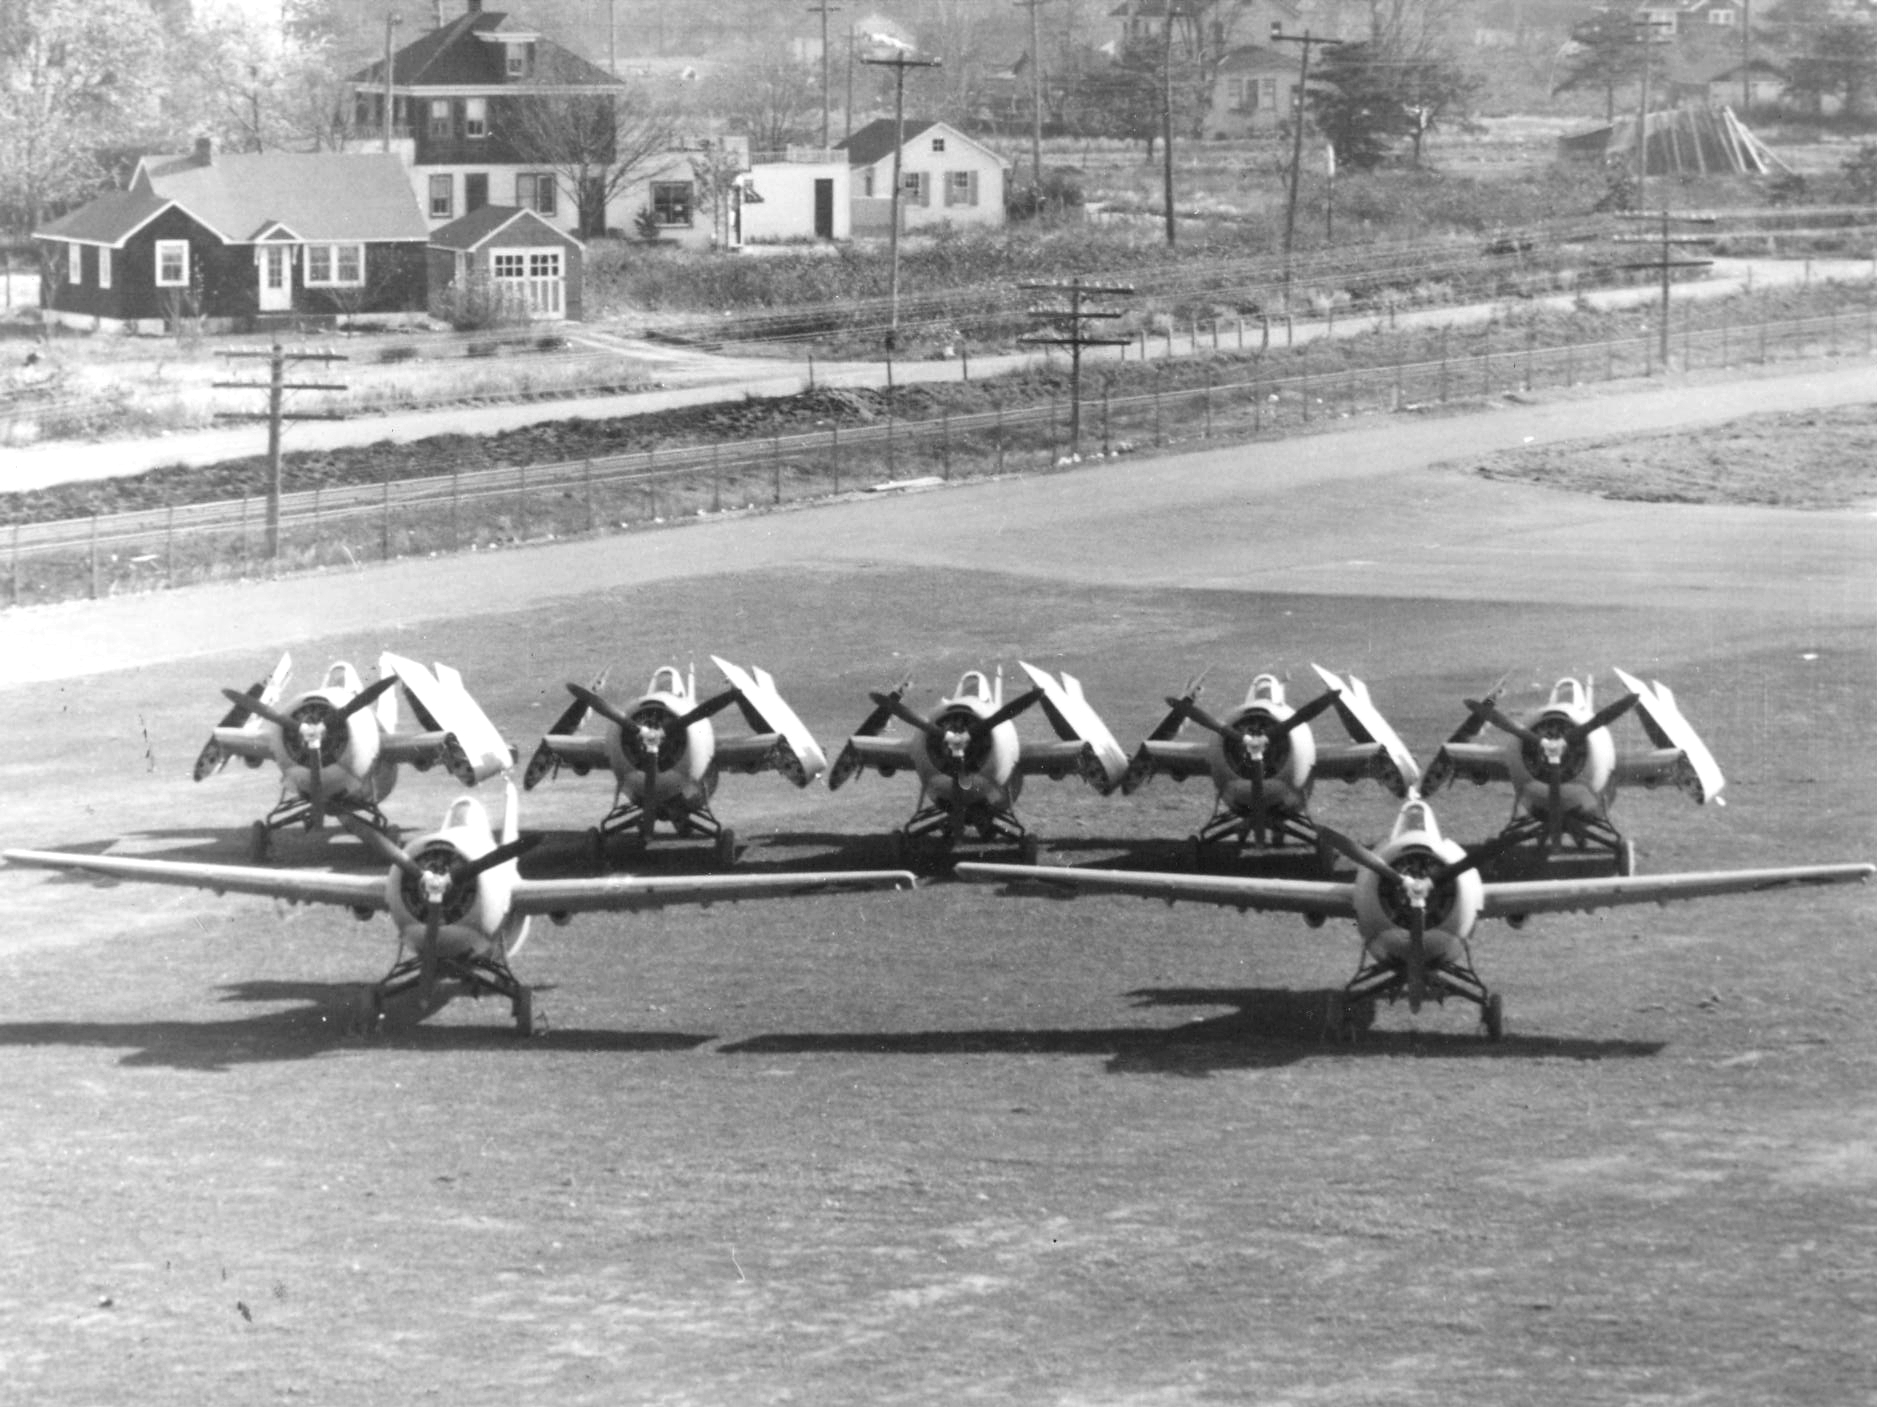 Grumman factory photo showing how five of the new F4F-4 “Sto-Wing” Wildcat fighters fit in the same space as two of the previous F4F-3 rigid wing fighters, Bethpage, New York, 1941. In practice, the ratio was more 3-to-2